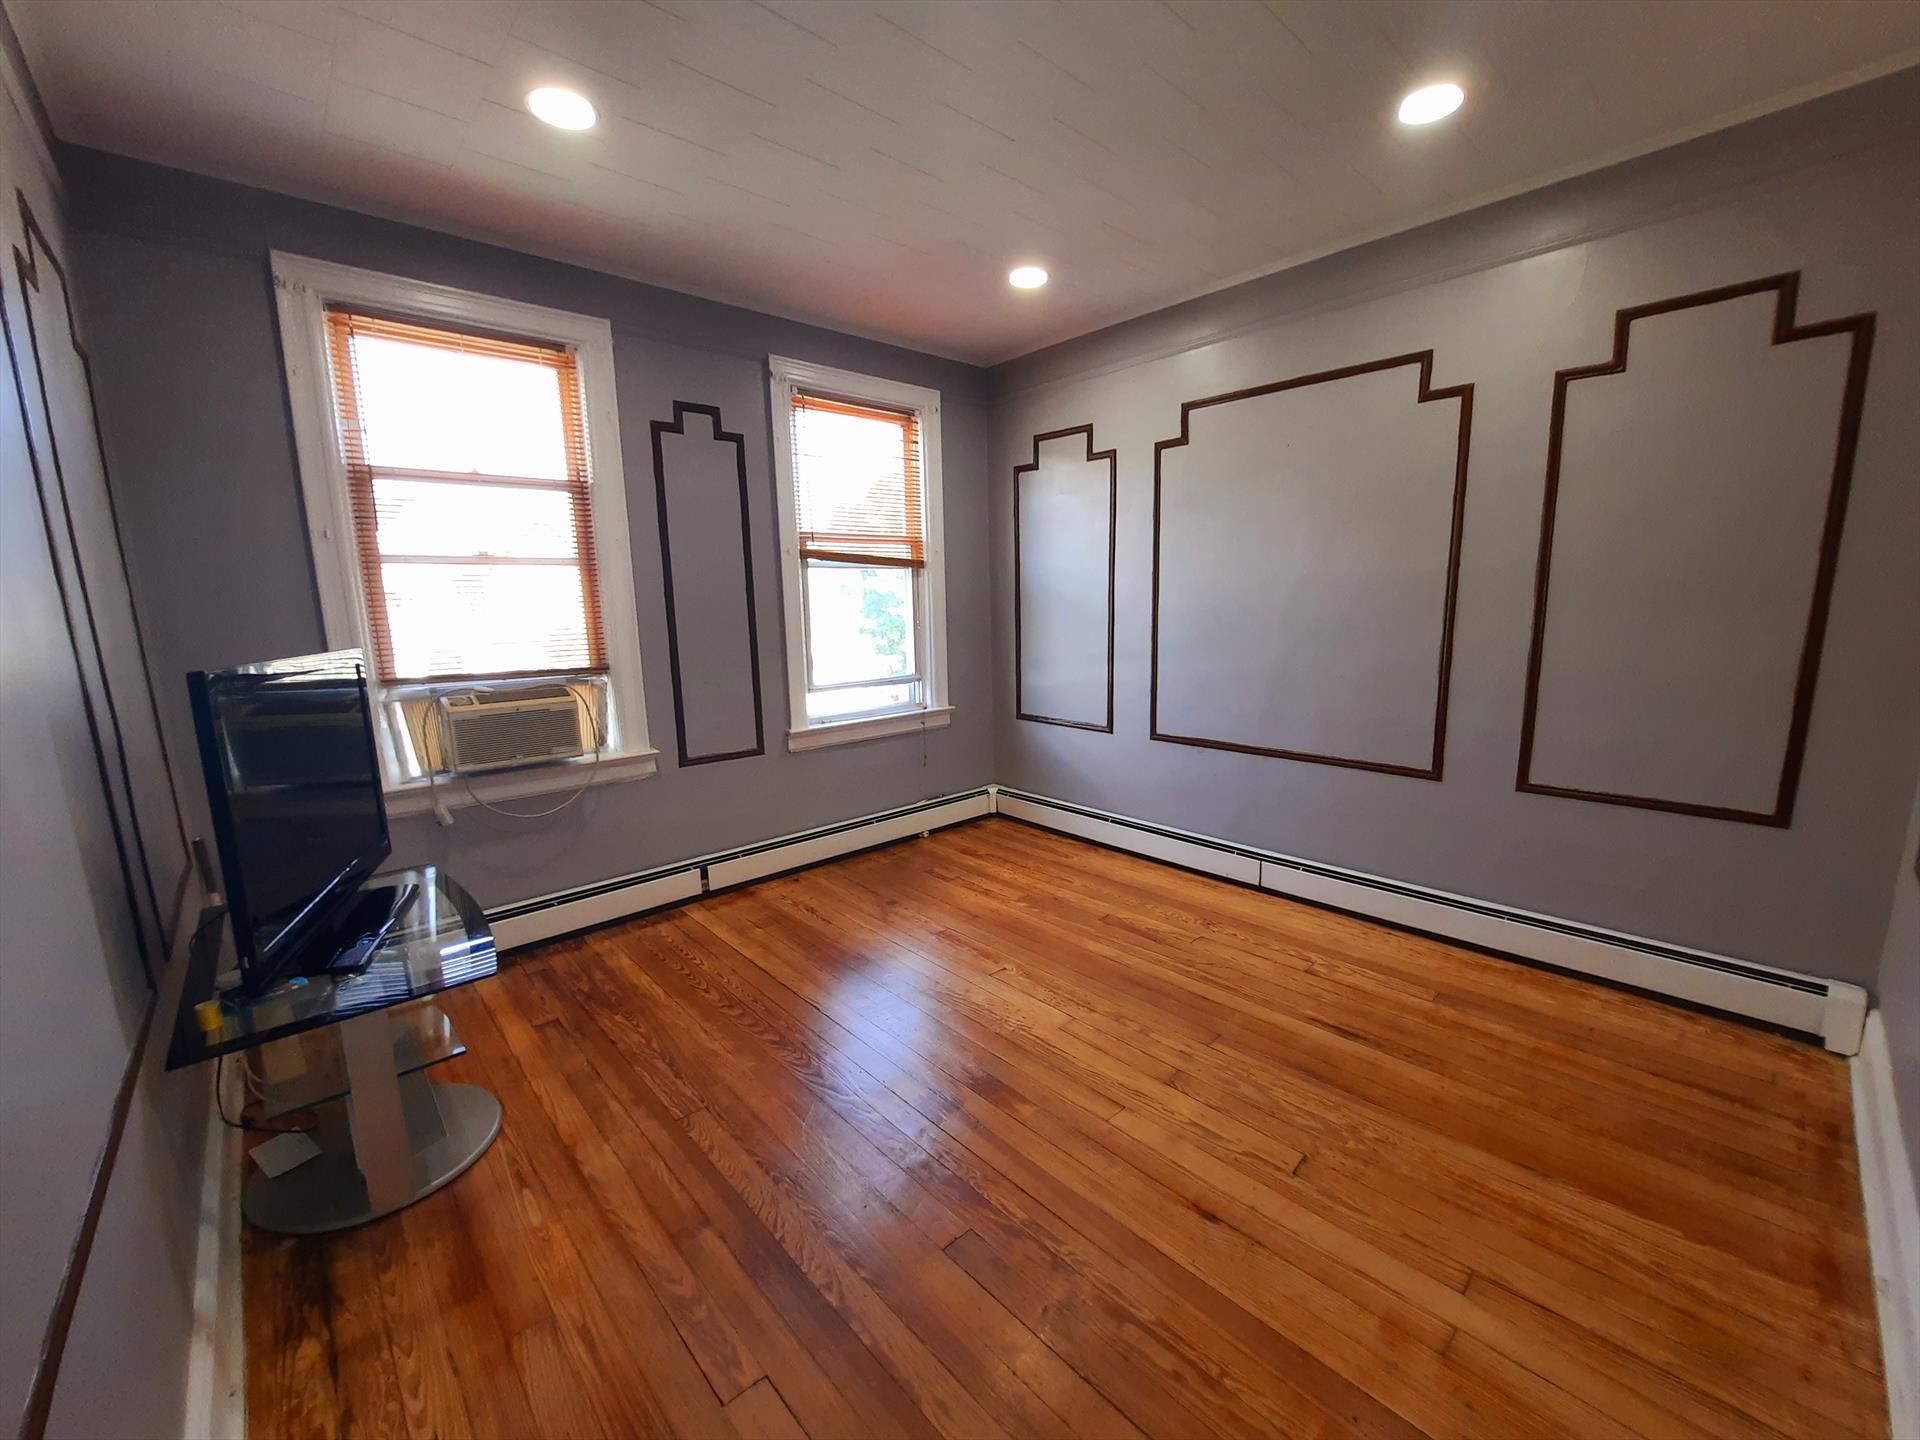 Move into this charming downtown Bayonne 2 BR located at 149 10th Street. Features: great natural light, hardwood and tile floors, eat-in kitchen with gas stove (NO REFRIGERATOR), living room (12' x 11.5'), 2 separate bedrooms with closets BR 1 (13' x 9' each), full bathroom with tub, ceiling fans, 2nd floor of a walk up, cold / hot water included, tenant pays for heat, gas, and electricity, one outdoor parking space available for an additional $100 per month. 
This lovely property is close to shopping, restaurants, parks, and public transportation to NYC.  1 cat allowed.  AVAILABLE ASAP!  To make this lovely apartment yours: $1650 (1st months rent), $2475 (security deposit), $1650 (broker fee), $50 (credit check per adult). Call Victor Alicea (Liberty Realty) at 917-617-9906 (m), or 201-610-1010 ext. 321 (o)f I am not available one of my colleagues will gladly assist you. Se habla espanol.